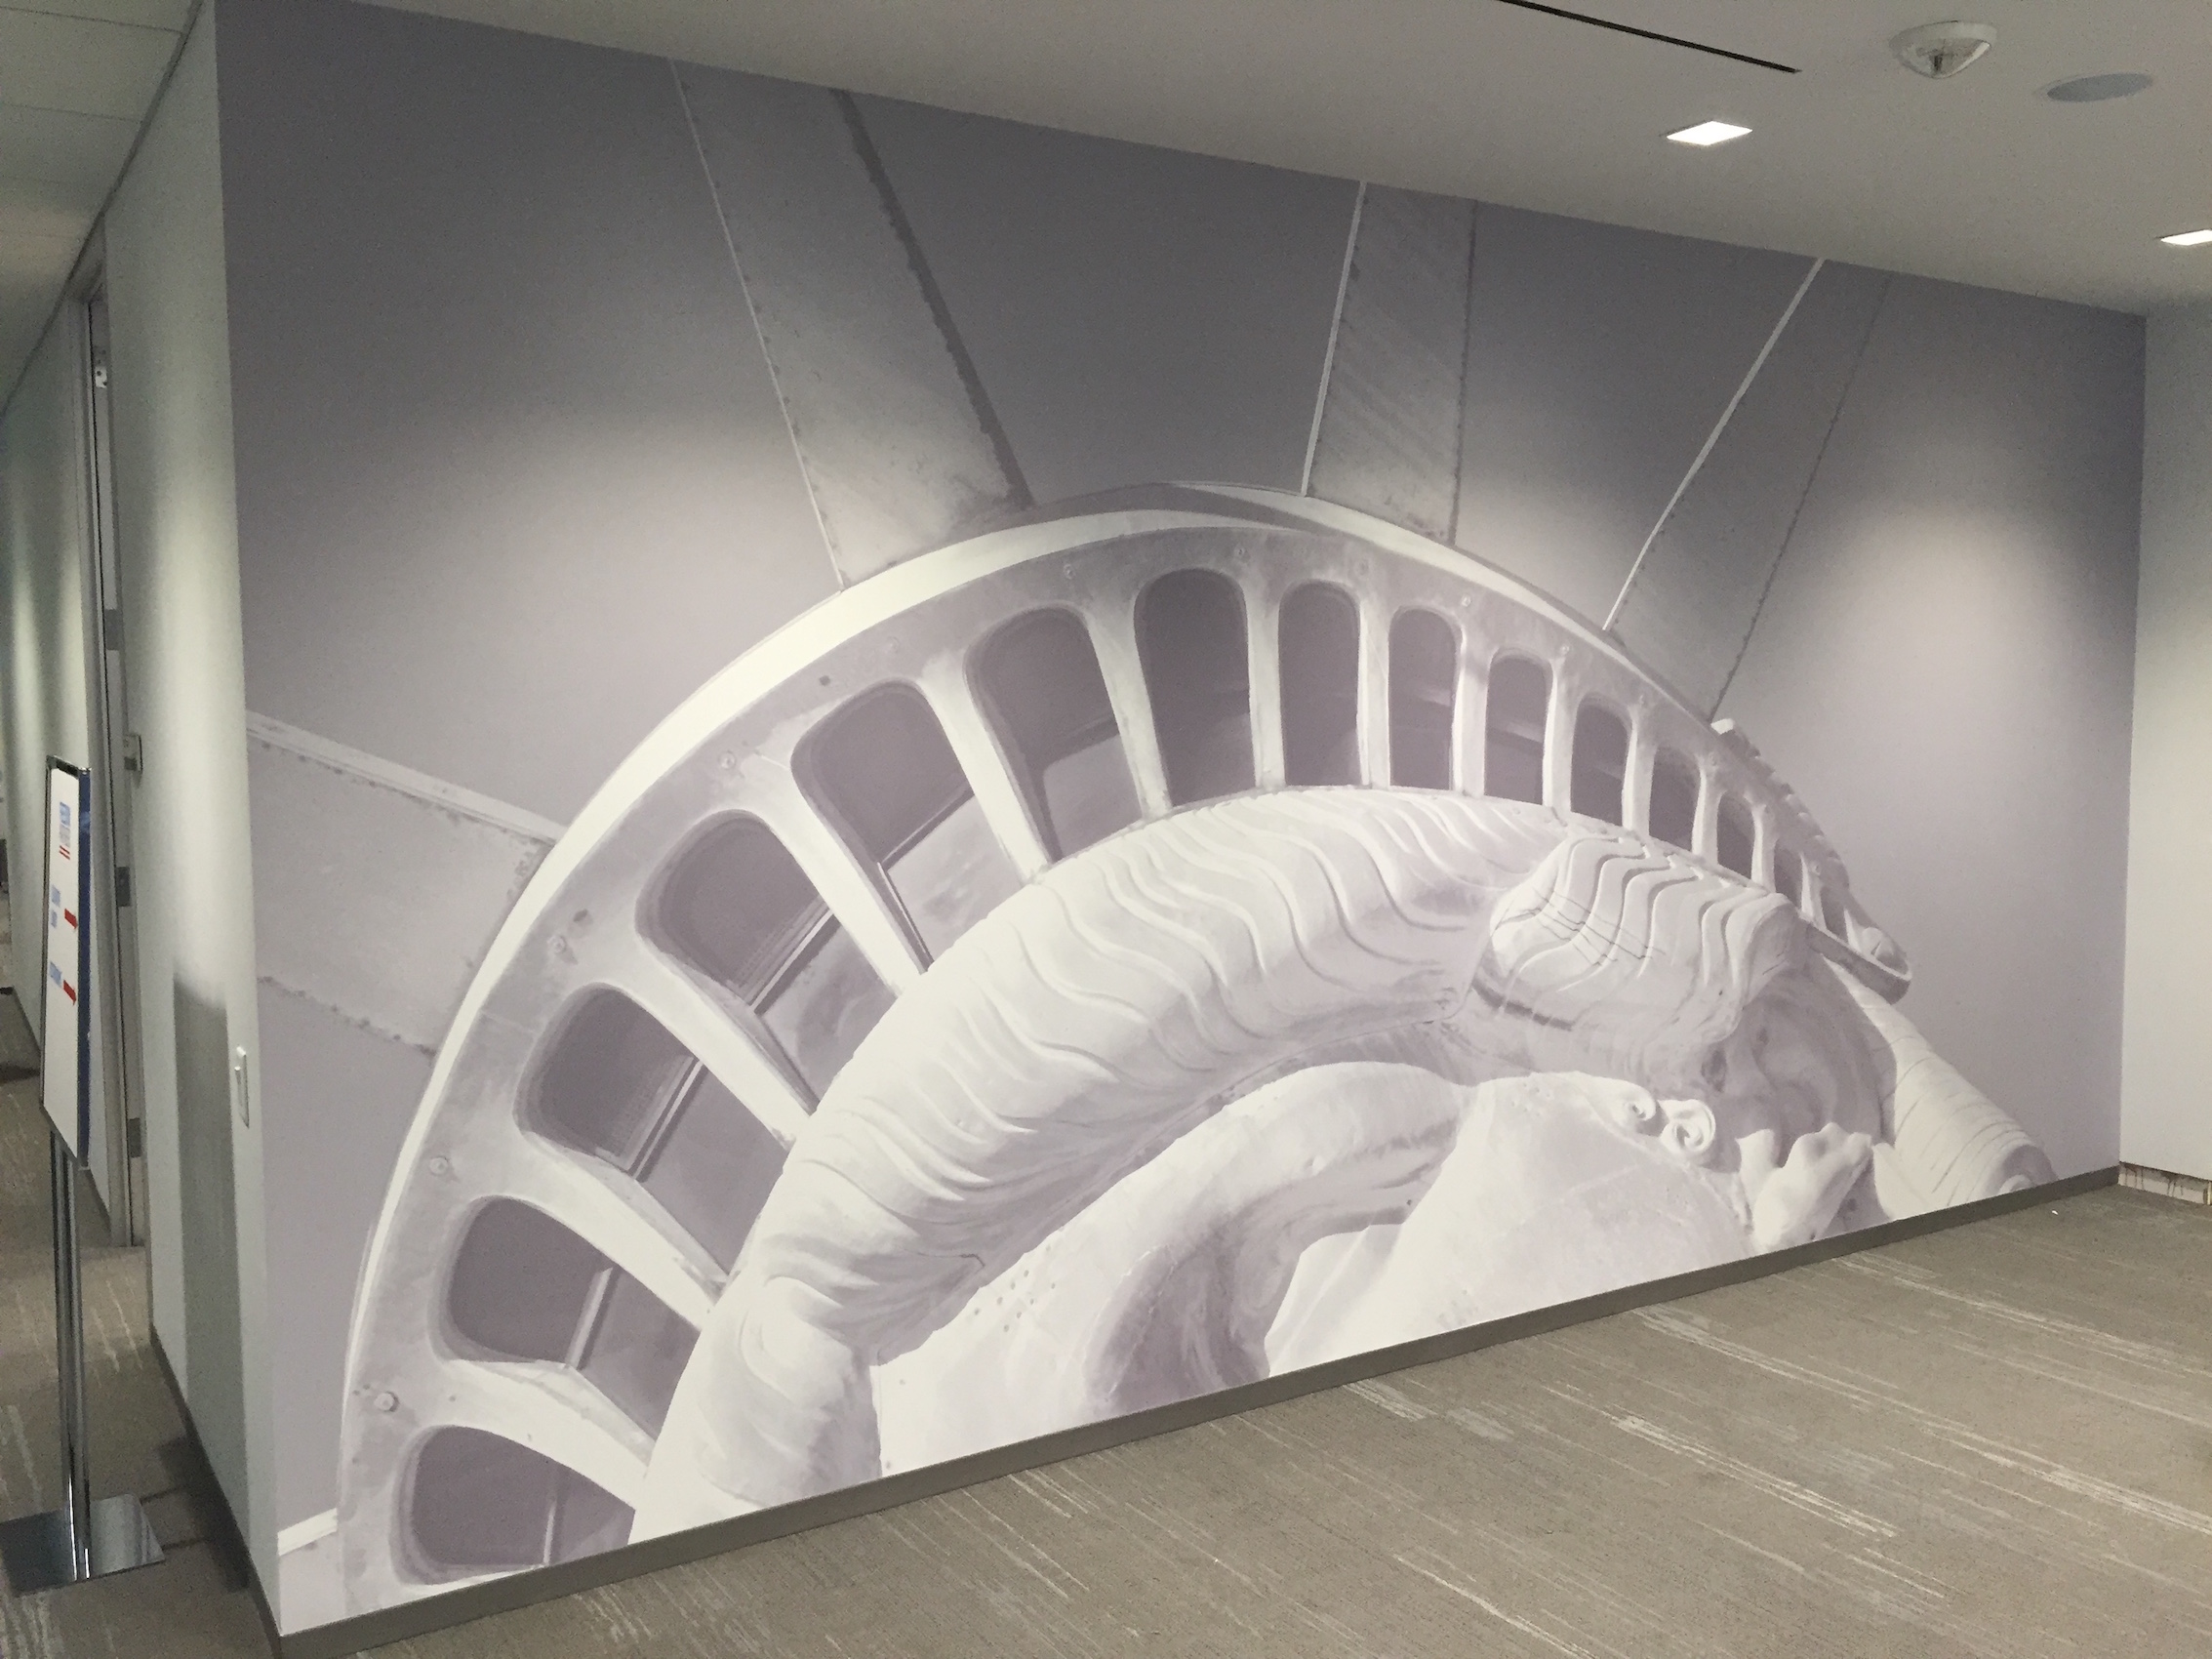 Statue of Liberty wall paper graphics